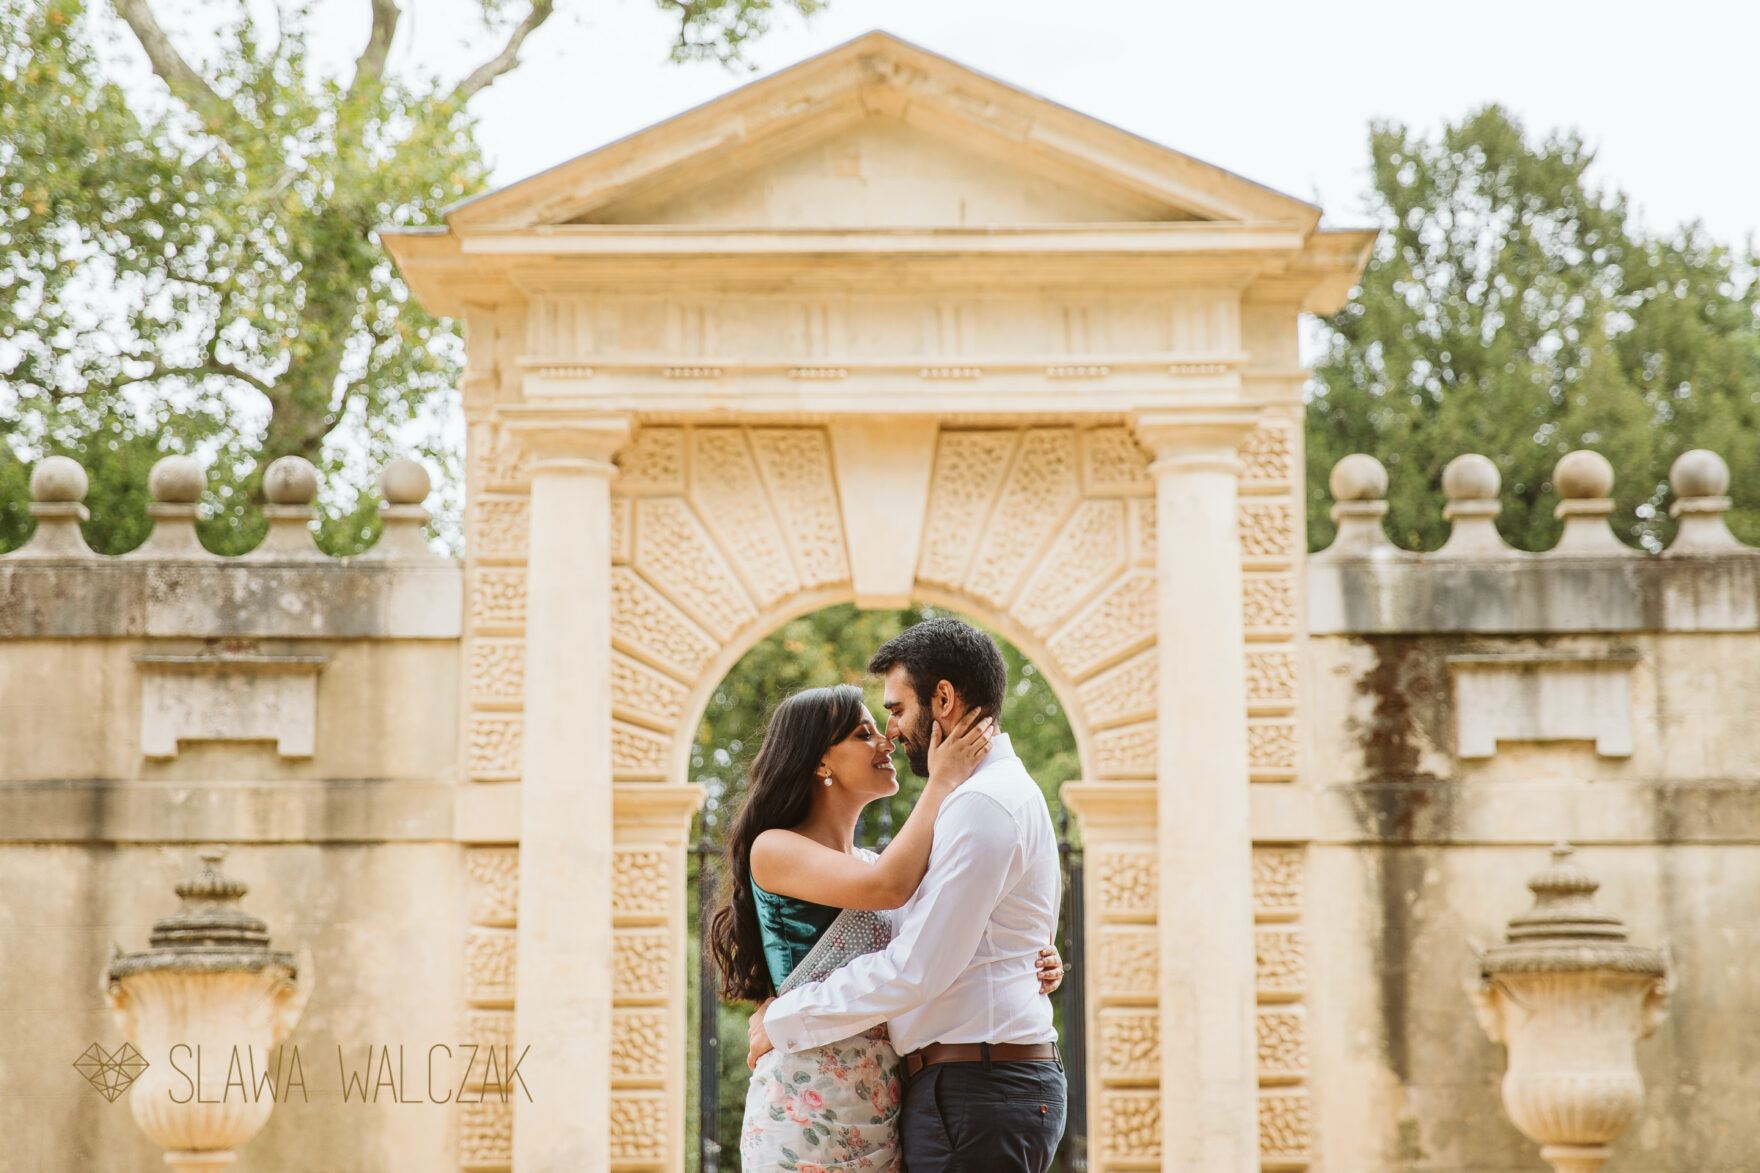 Natural and romantic engagement photo shoot Chiswick House Asian couple embrace each other romantically